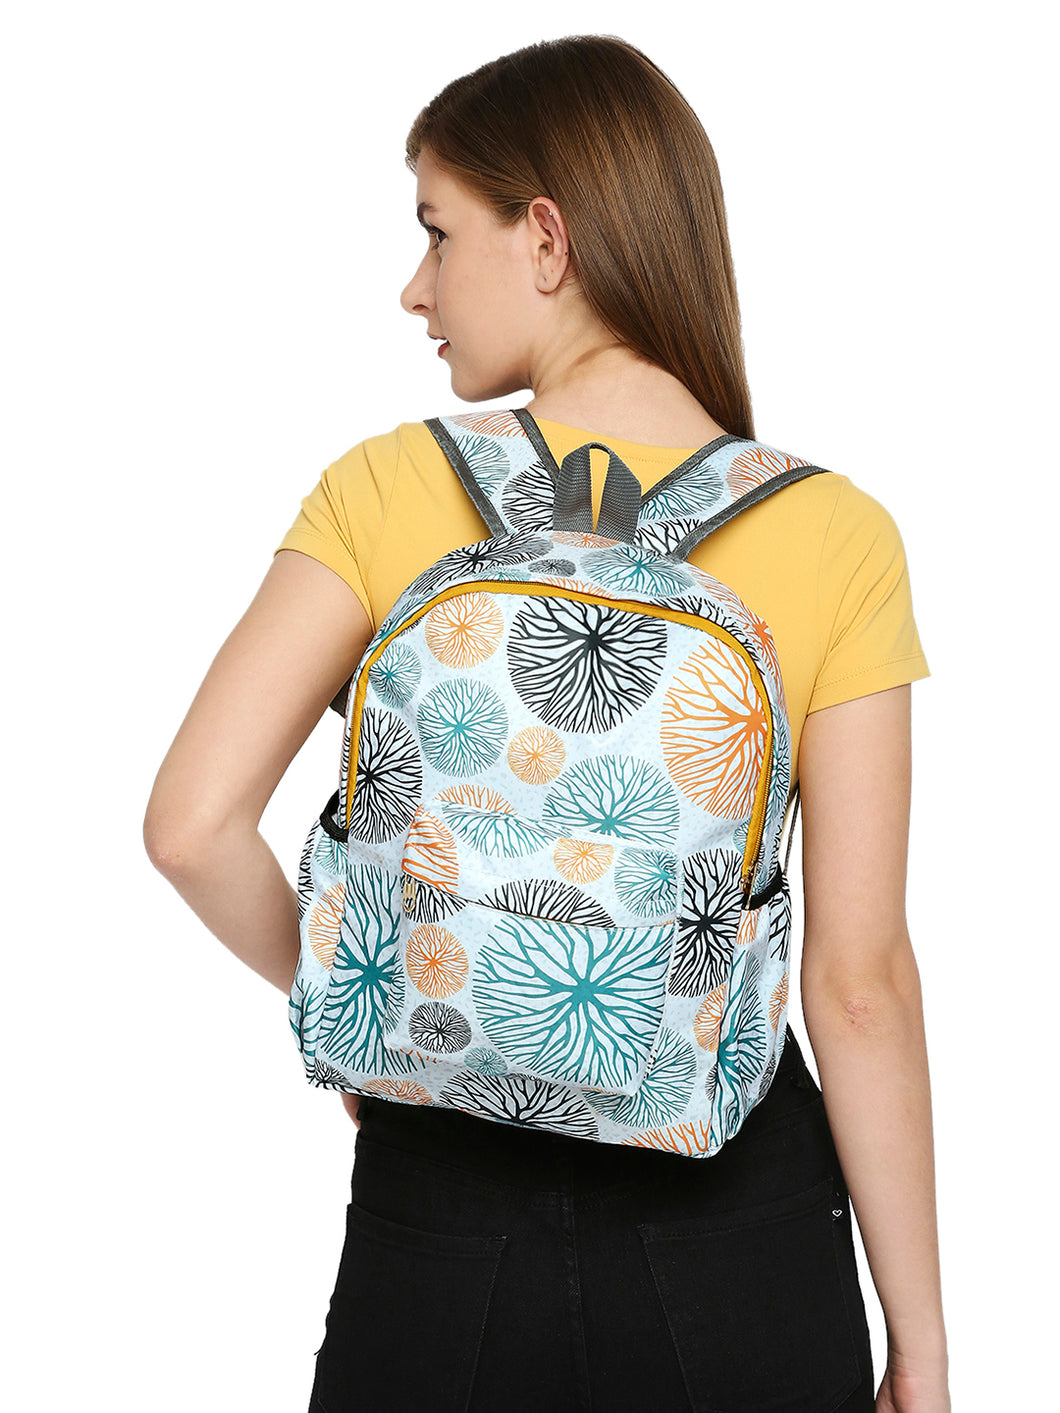 Crayton Backpack in White Floral Print with Pouch